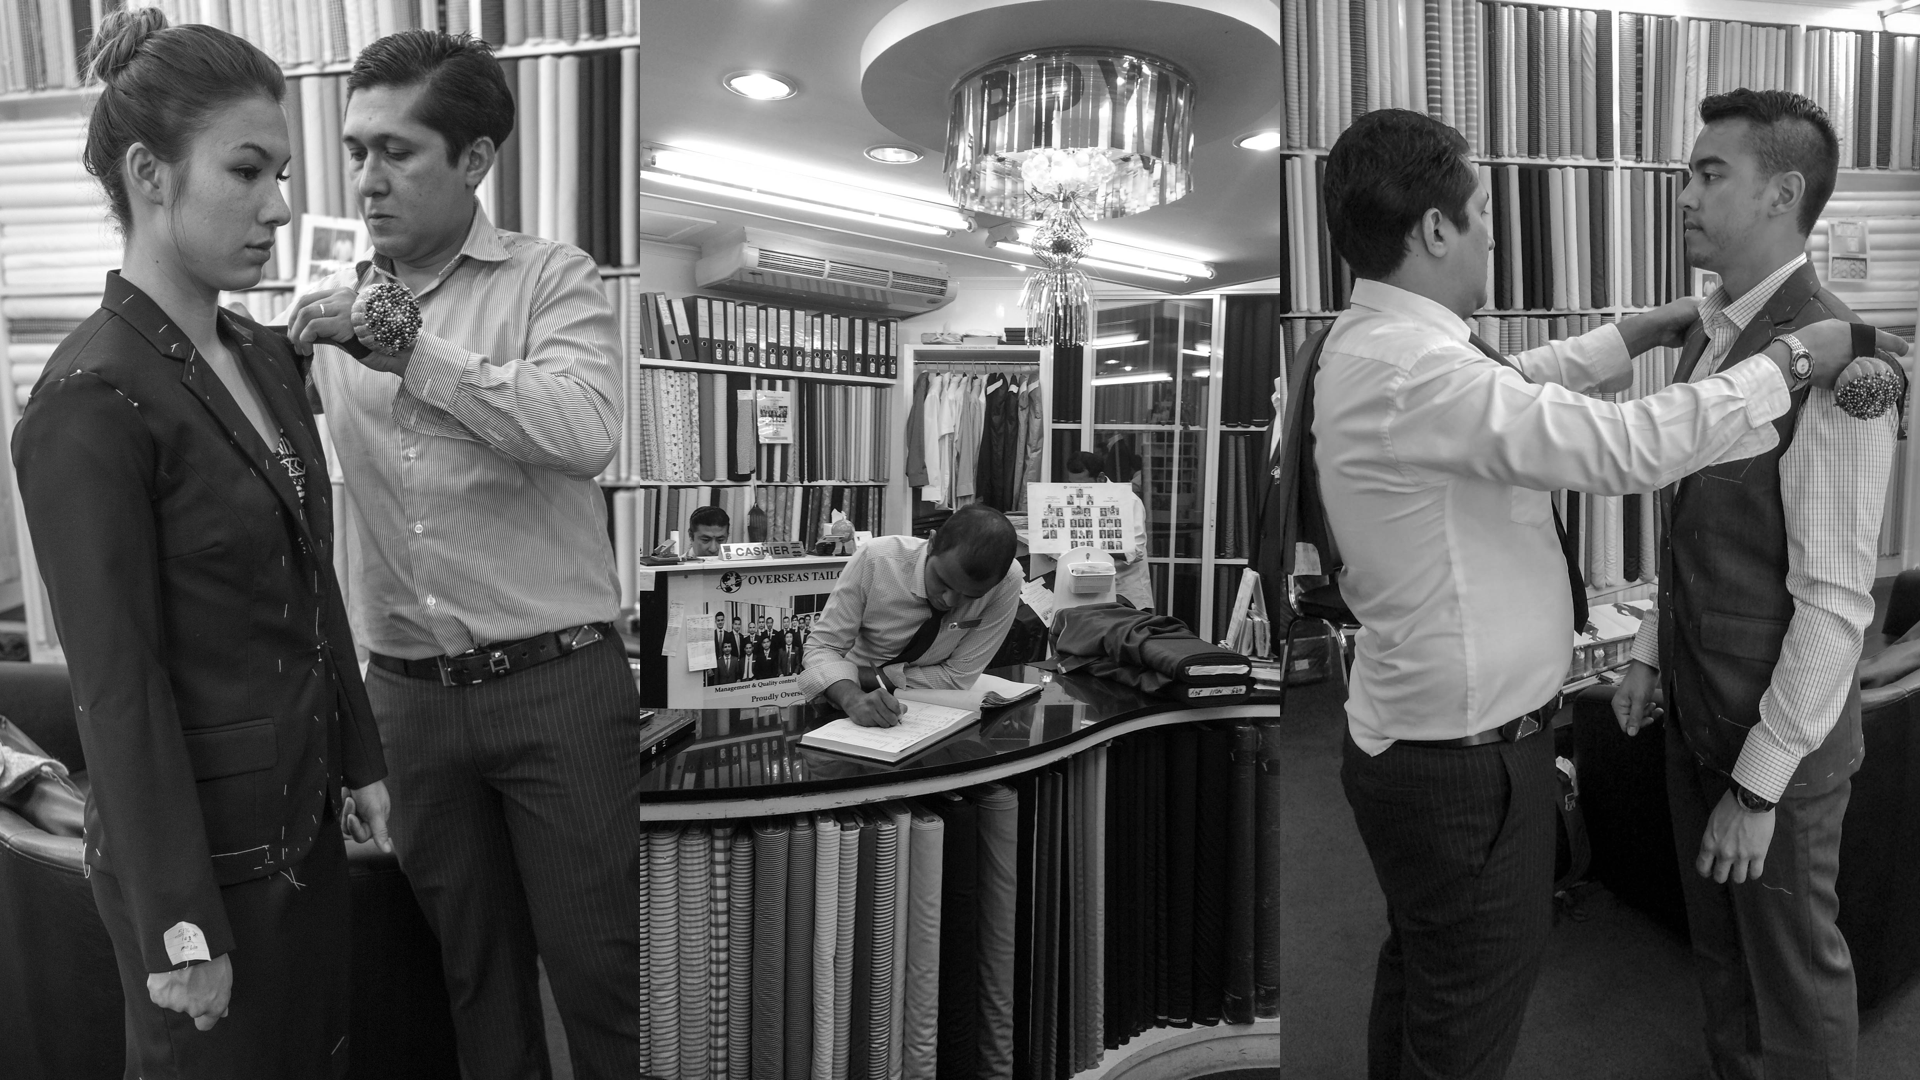 Getting a custom-made suit in Thailand